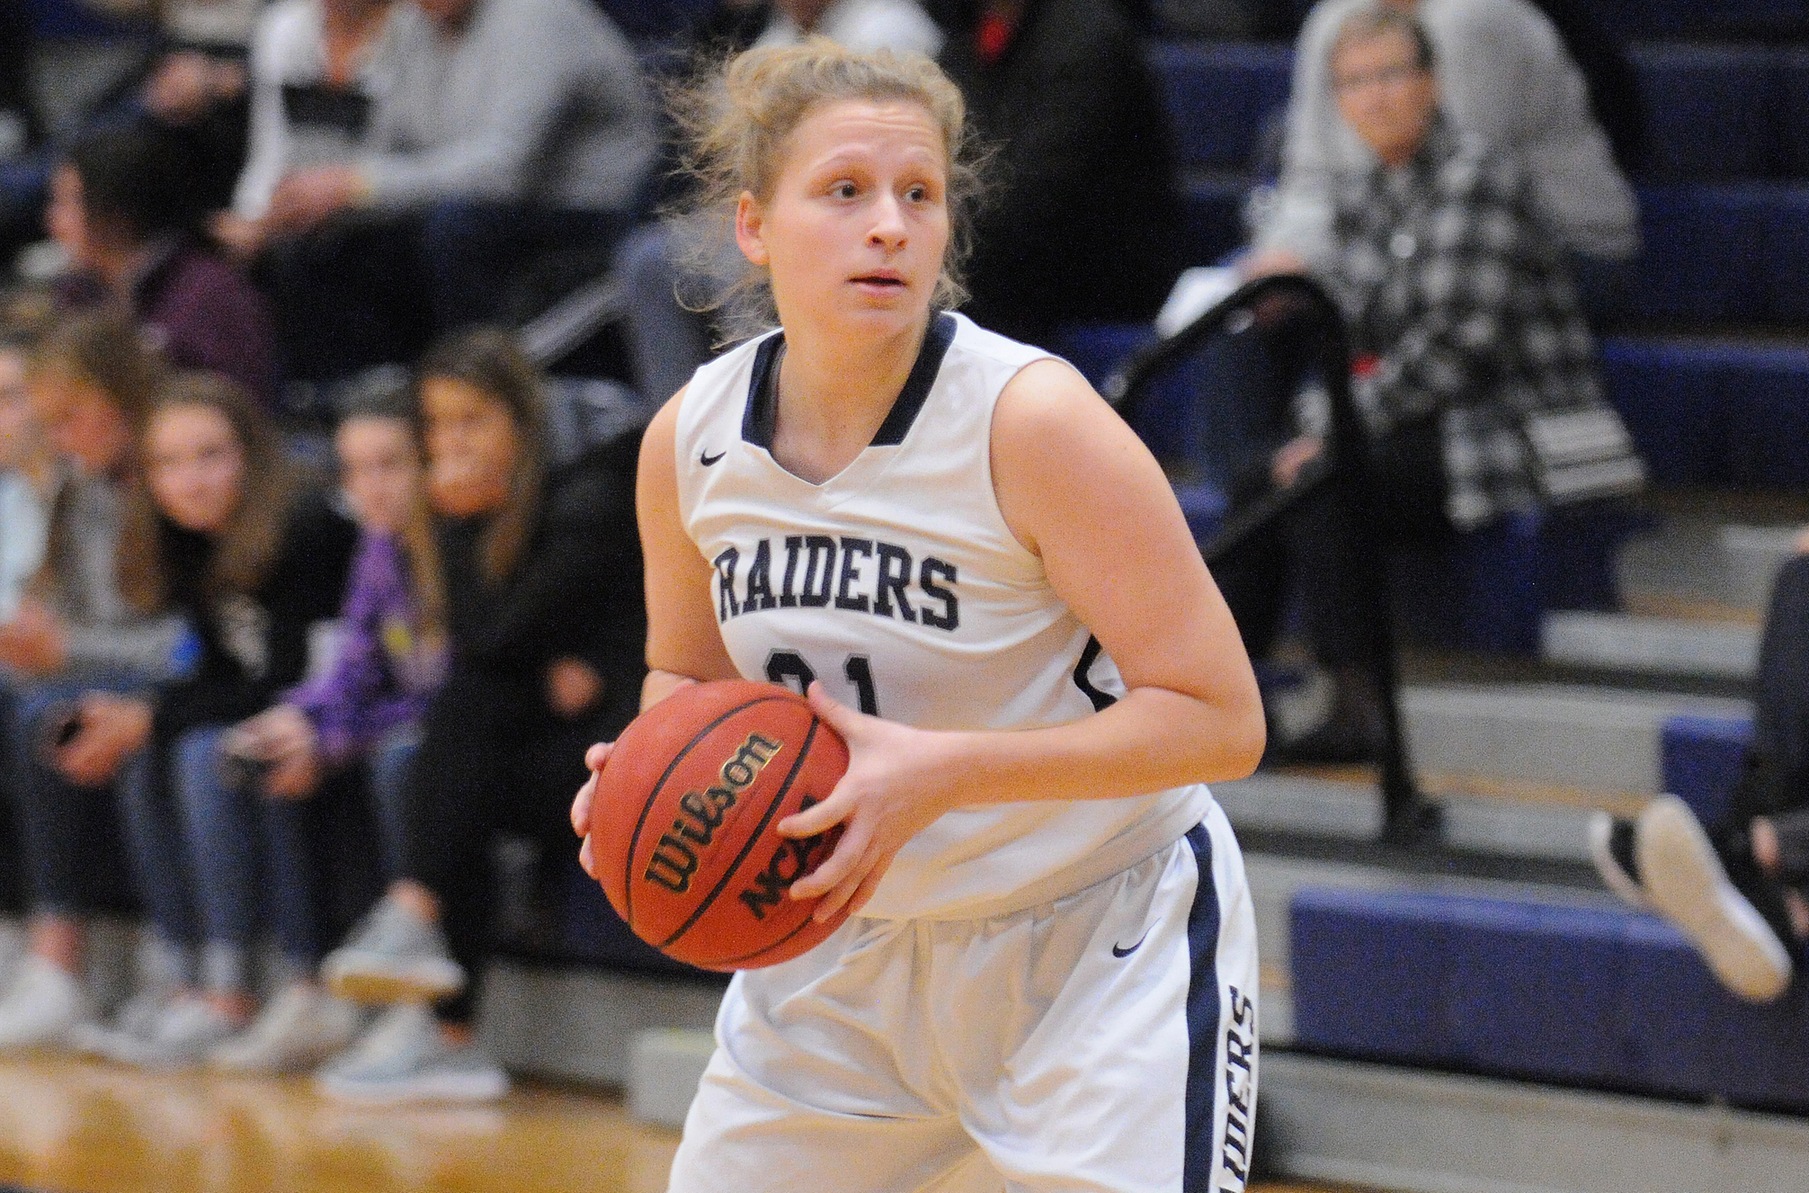 Women's Basketball: Raiders drop non-conference contest with Colby